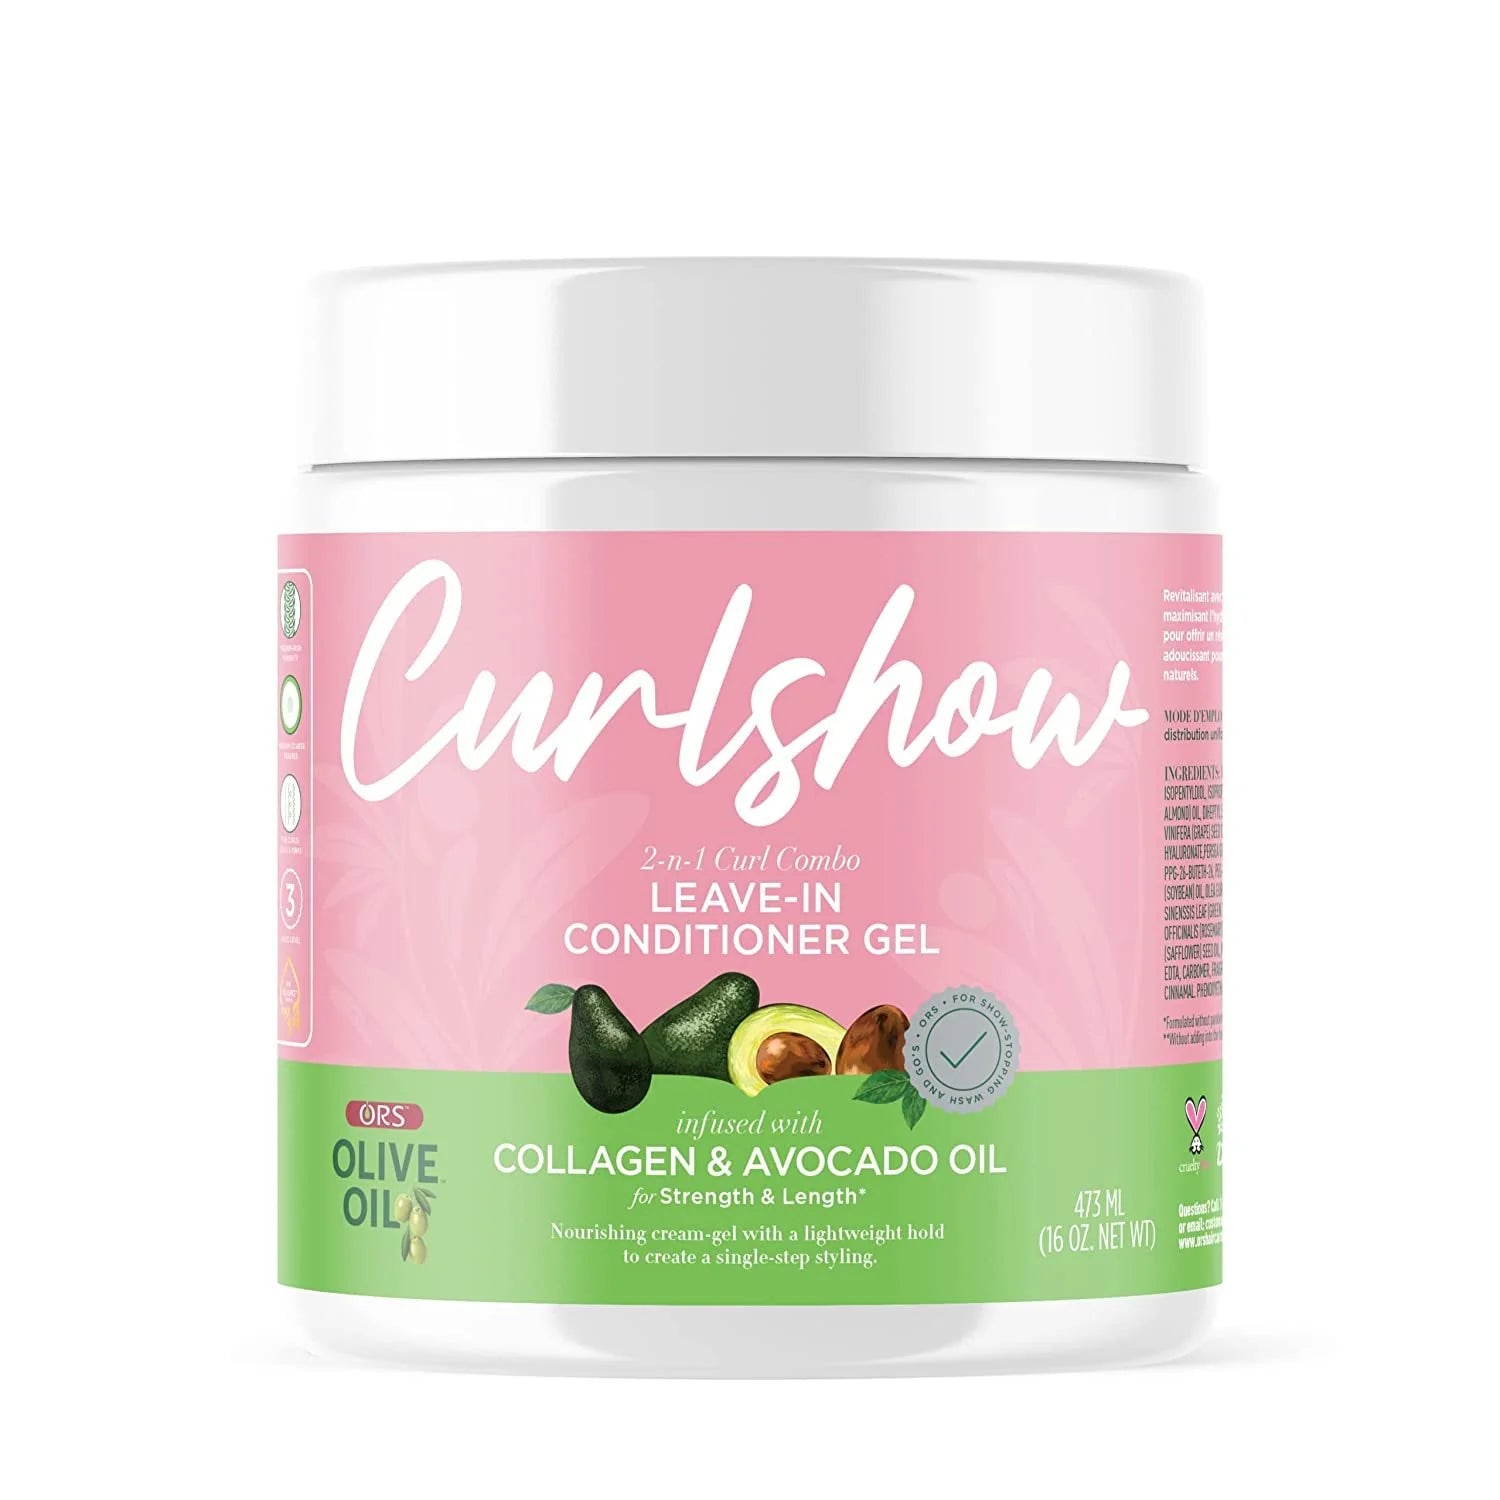 Oraganic ORS - Curlsshow 2-n-1 Curl Combo Leave-in Conditioner gel 16oz